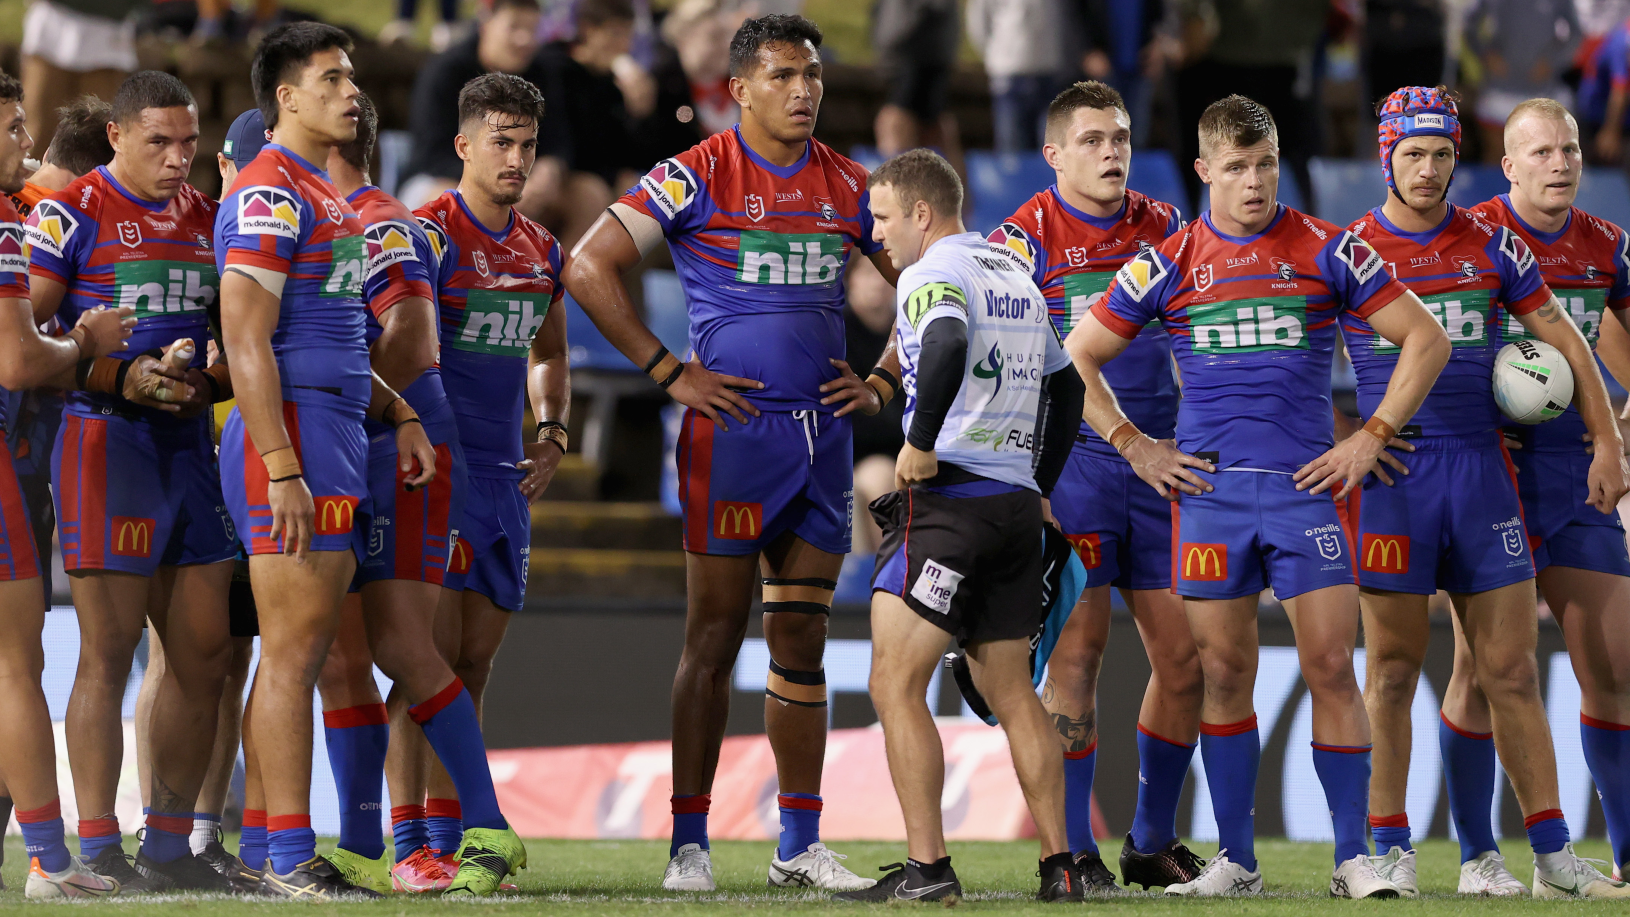 EXCLUSIVE: Peter Sterling says Newcastle Knights' season is on the brink